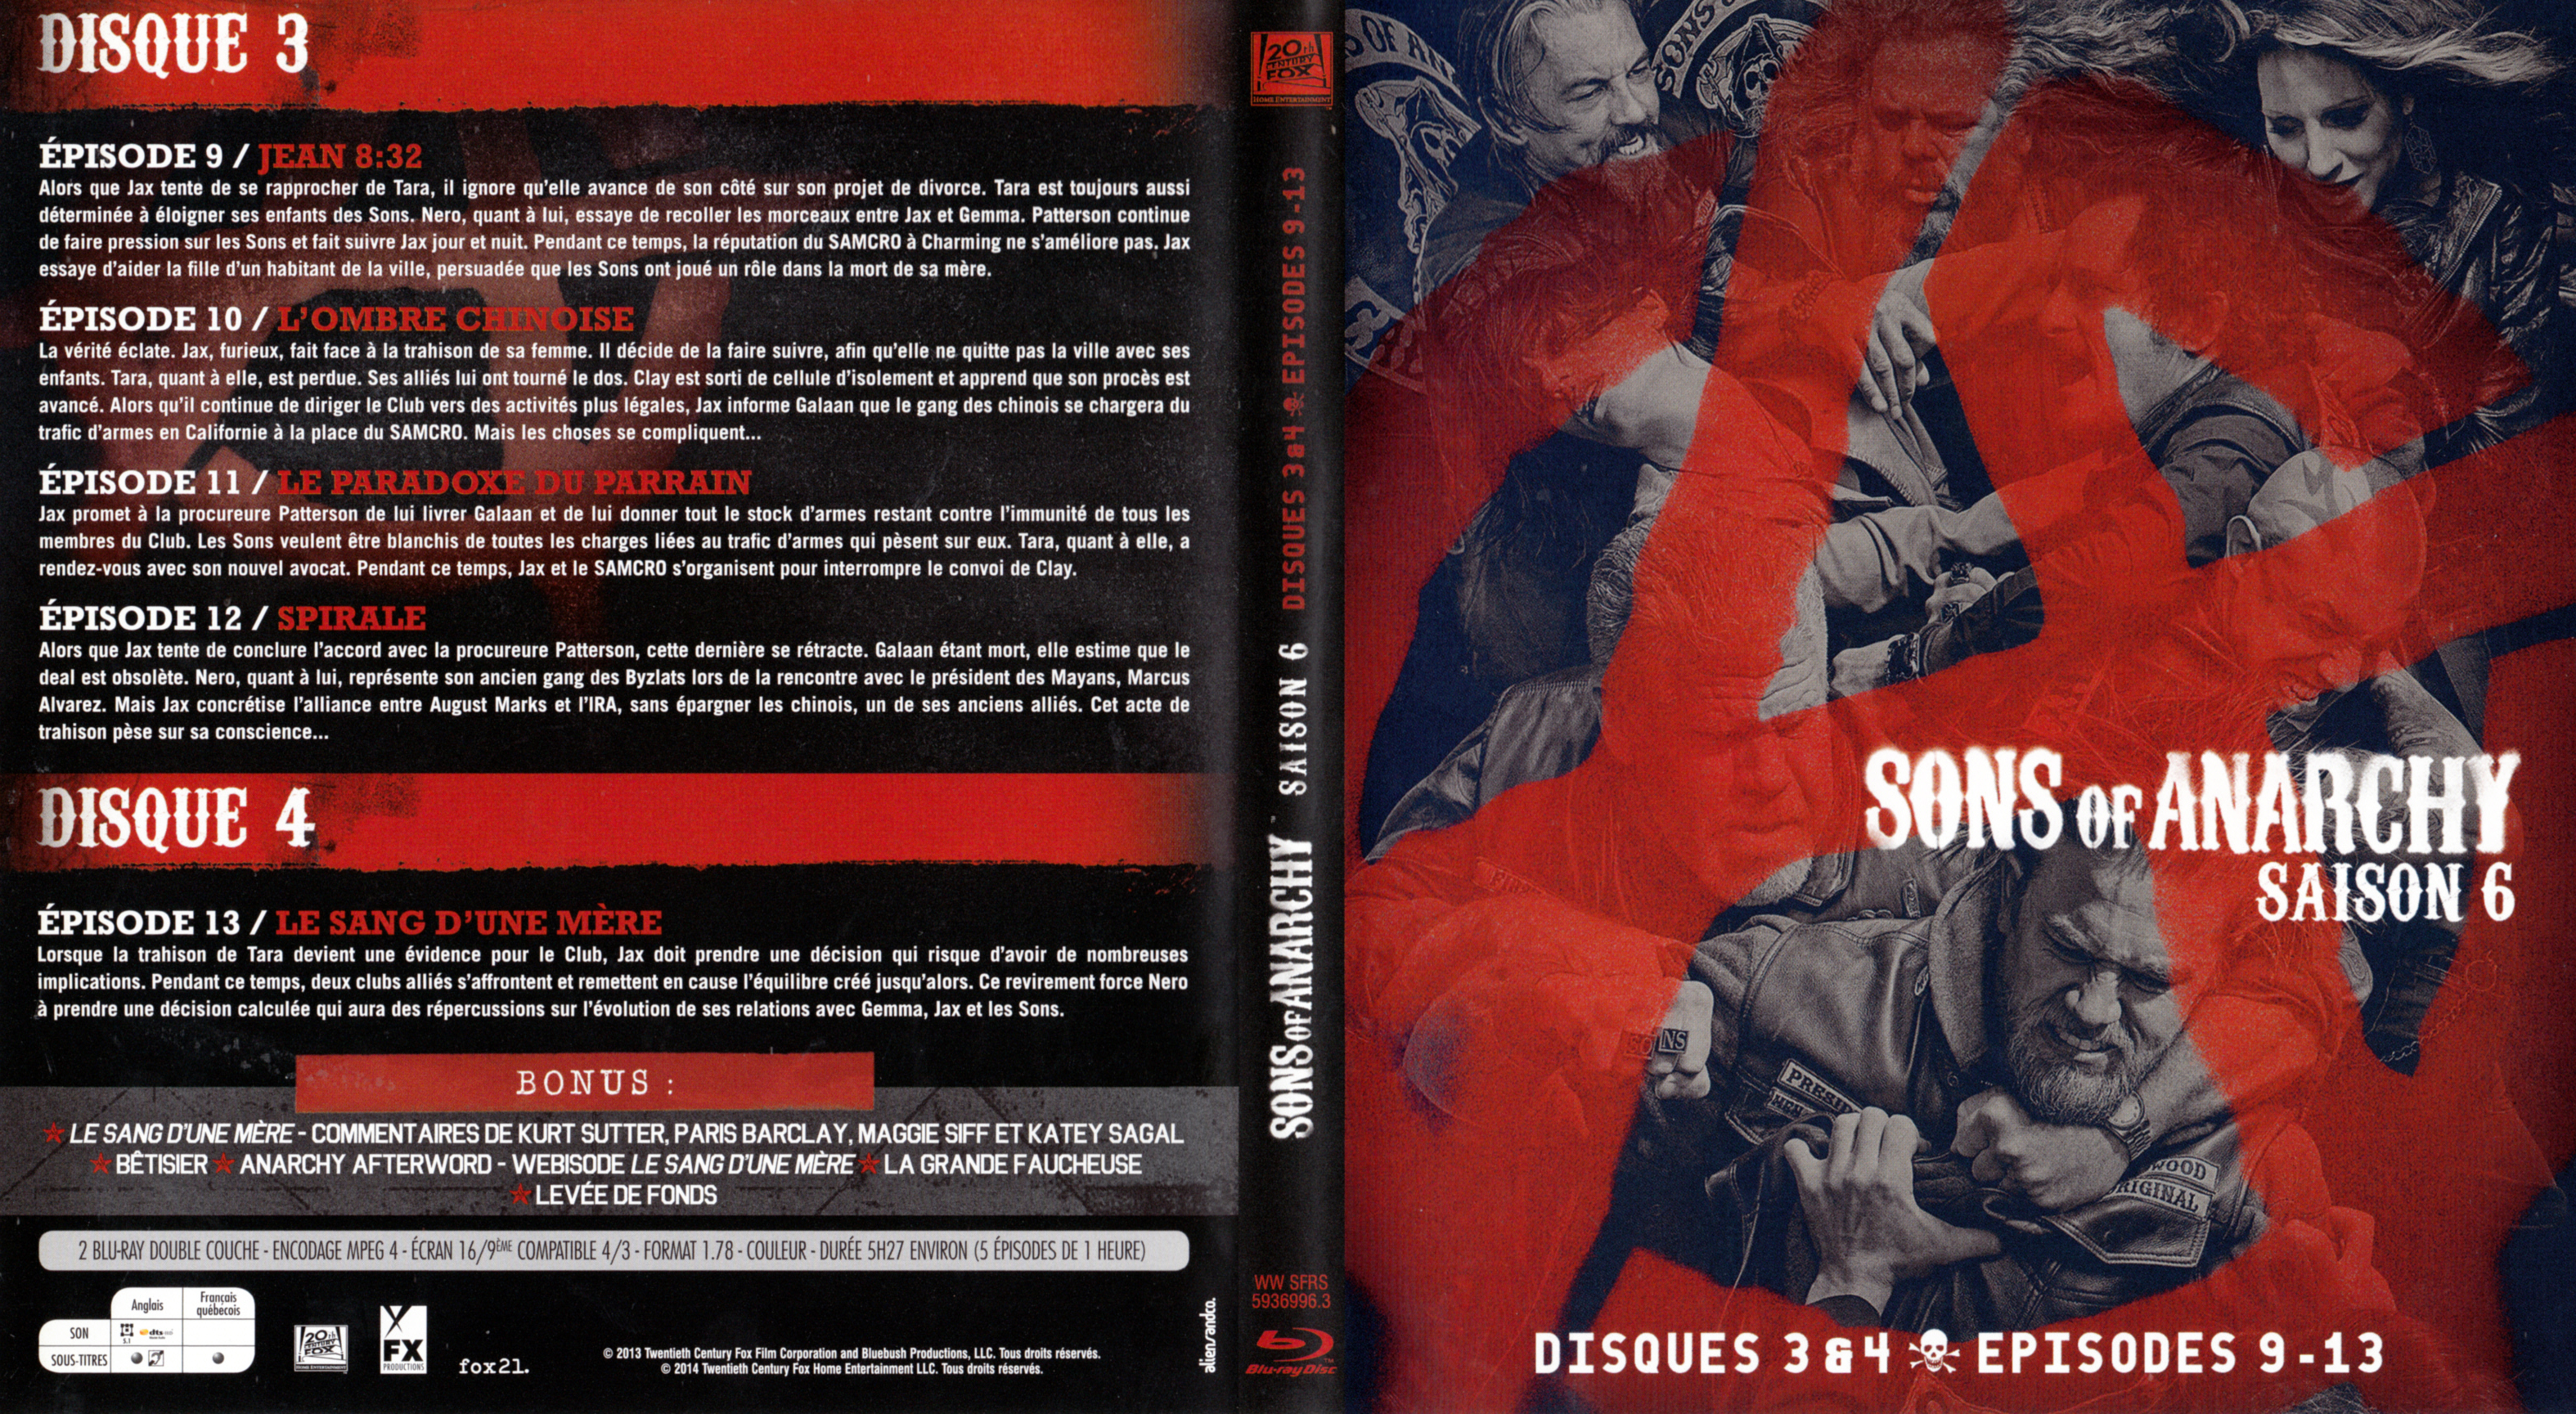 Jaquette DVD Sons of anarchy Saison 6 DISC 3-4 (BLU-RAY)